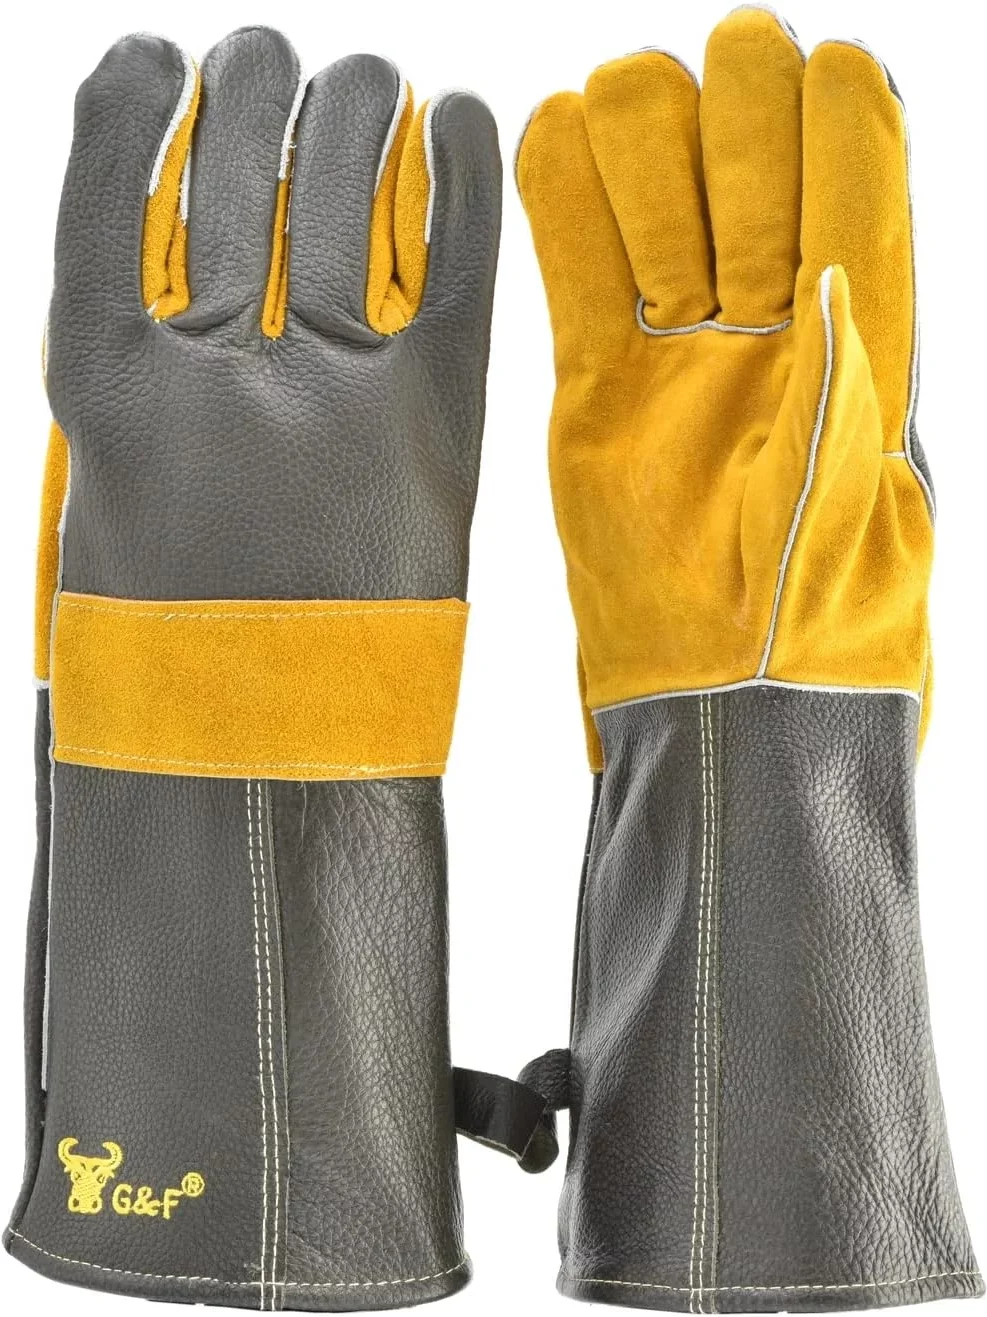 G F 8115 Heat Resistant Leather Gloves Overview 1 Edited